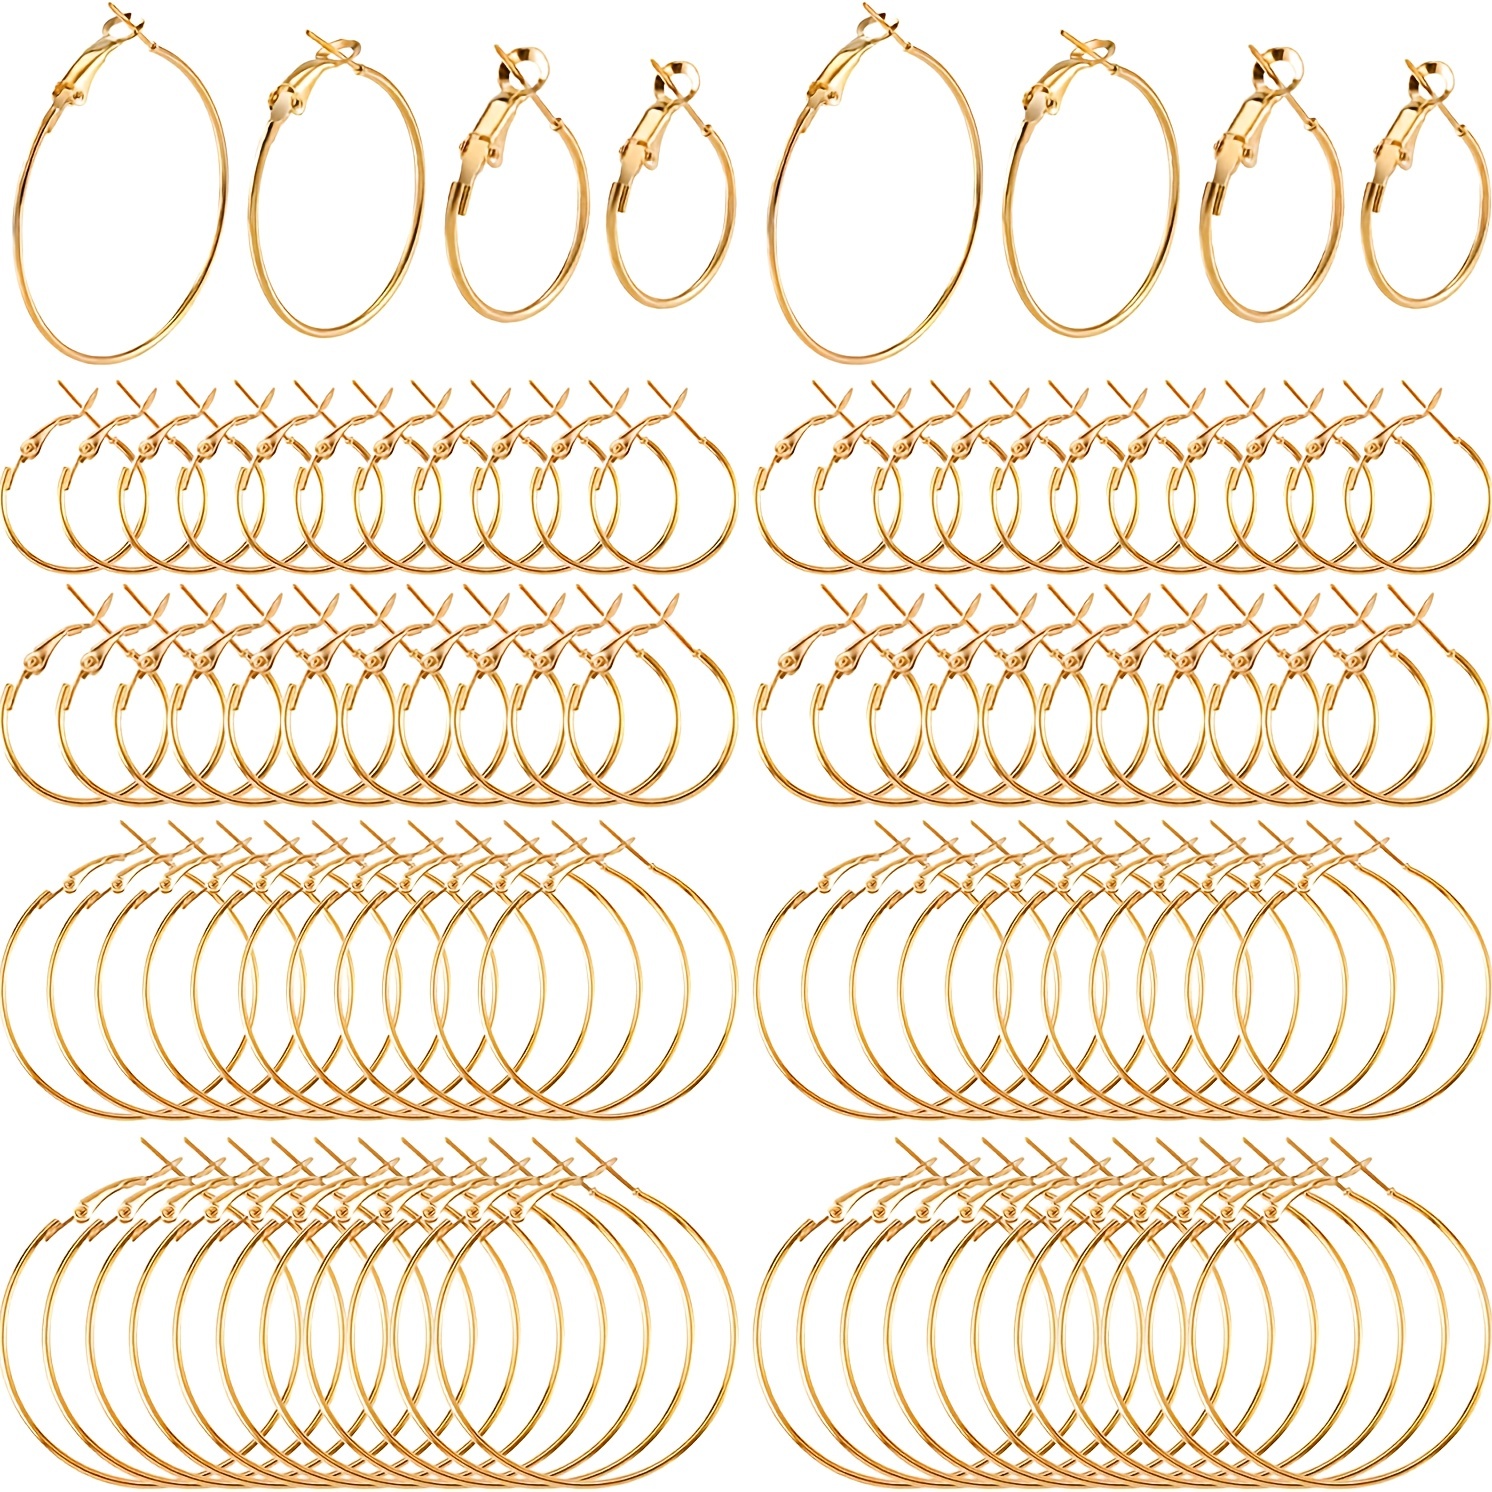 5Pcs Oval Embroidery Hoop - Imitation Wood Cross Stitch Hoop Frame Set,  Display Embroidery Rings for Needlepoint Sewing Craft (5 Different Sizes)